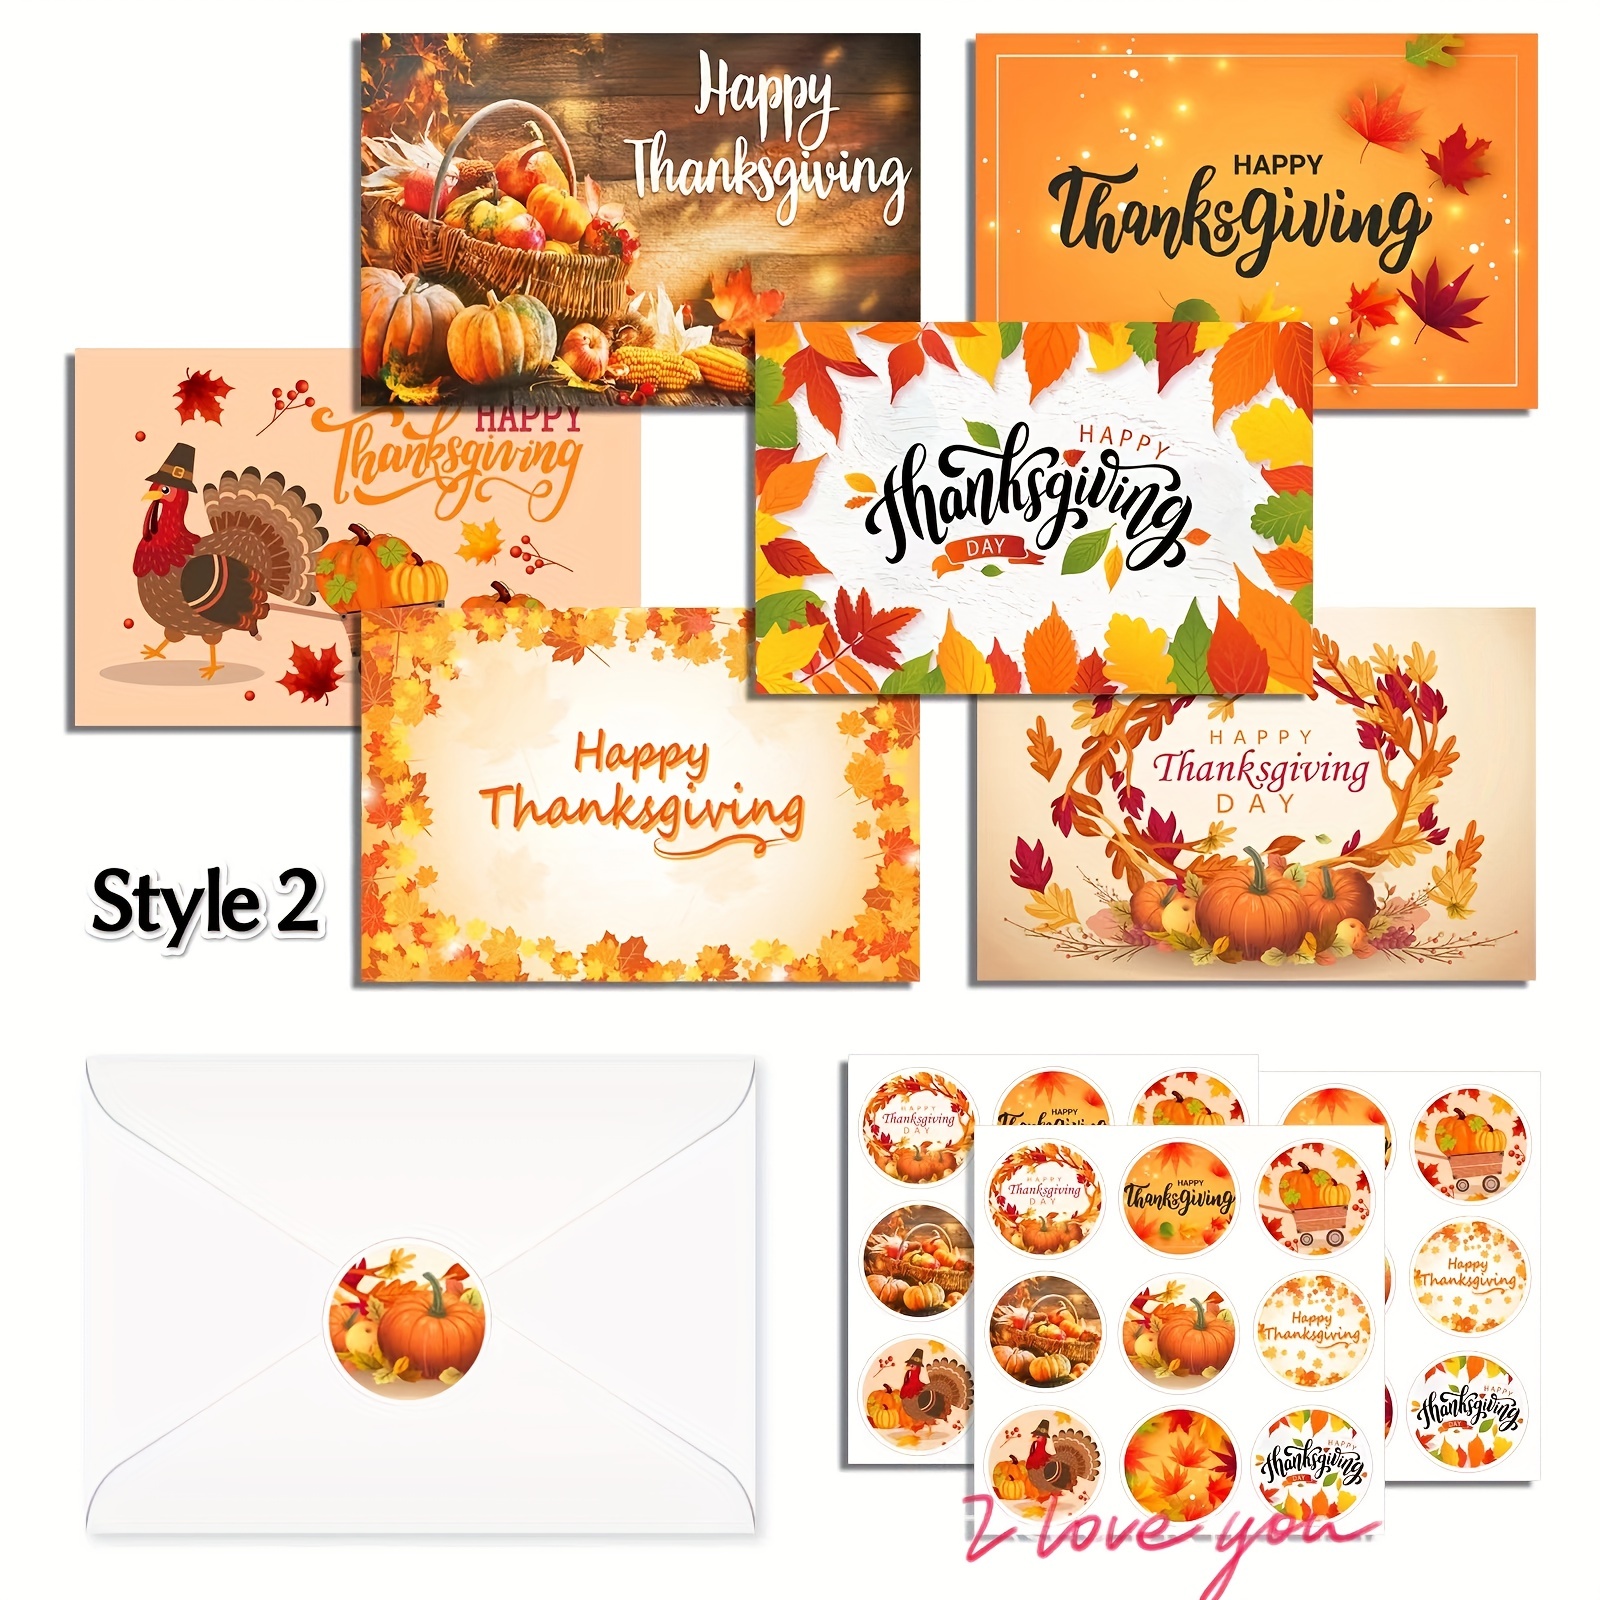 Postcard Thanksgiving Day Festival Christmas Small Cards Cartoon Mini  Birthday Blessing New Style Greeting Card Hot Selling 0 32bl P1 From Sd003,  $0.14